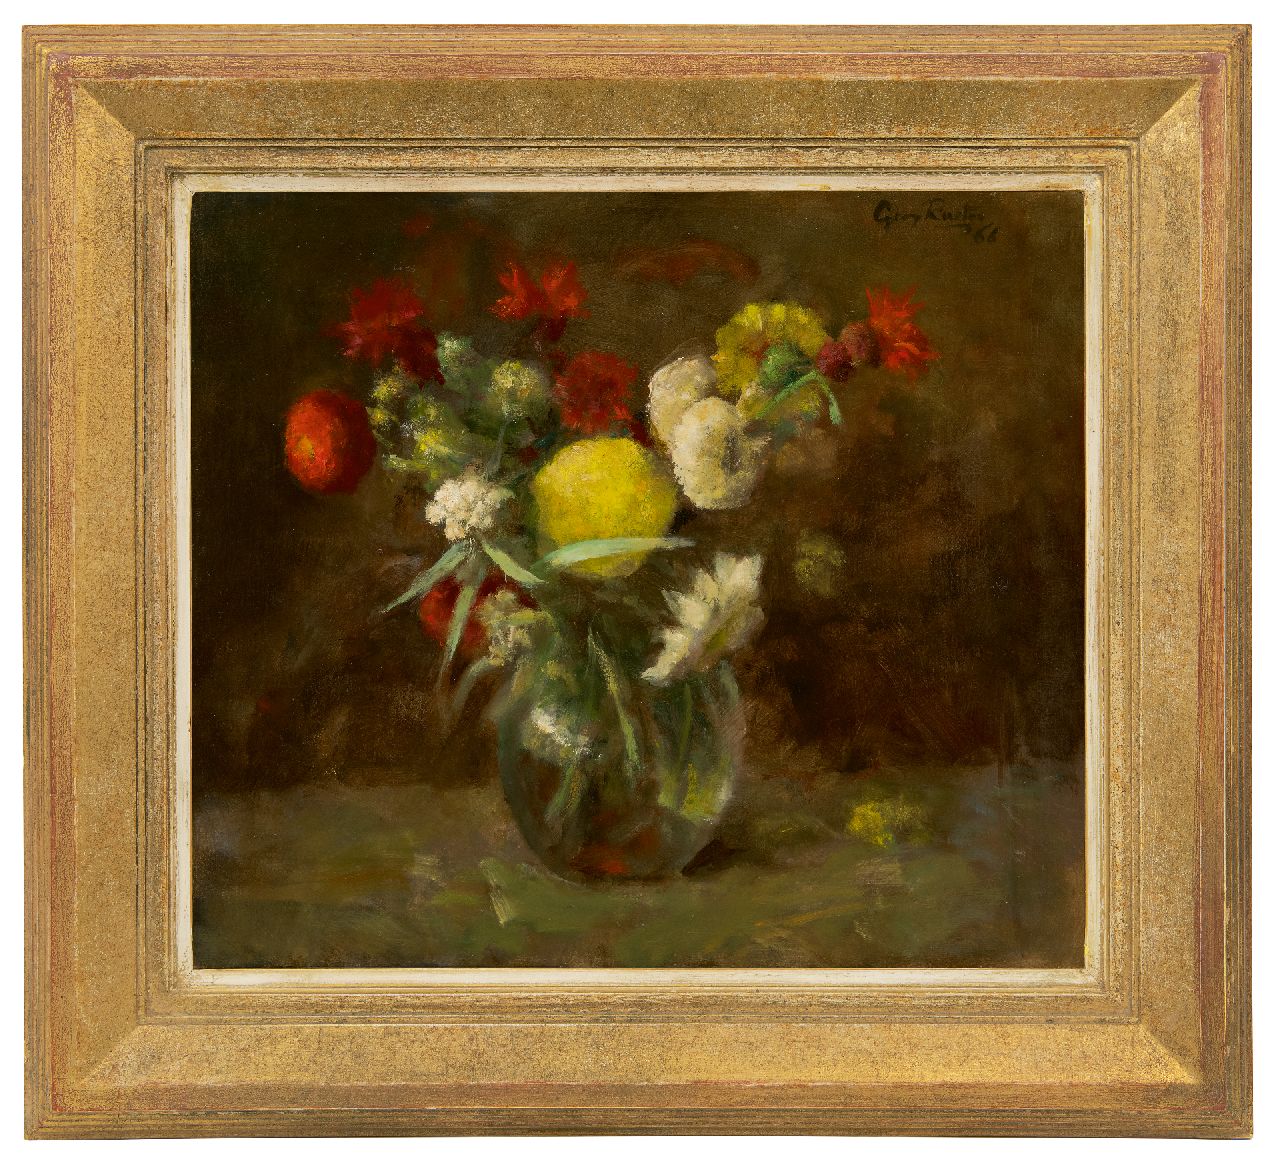 Rueter W.C.G.  | Wilhelm Christian 'Georg' Rueter | Paintings offered for sale | Flowers in a glass vase, oil on canvas 39.8 x 45.0 cm, signed u.r. and dated '66